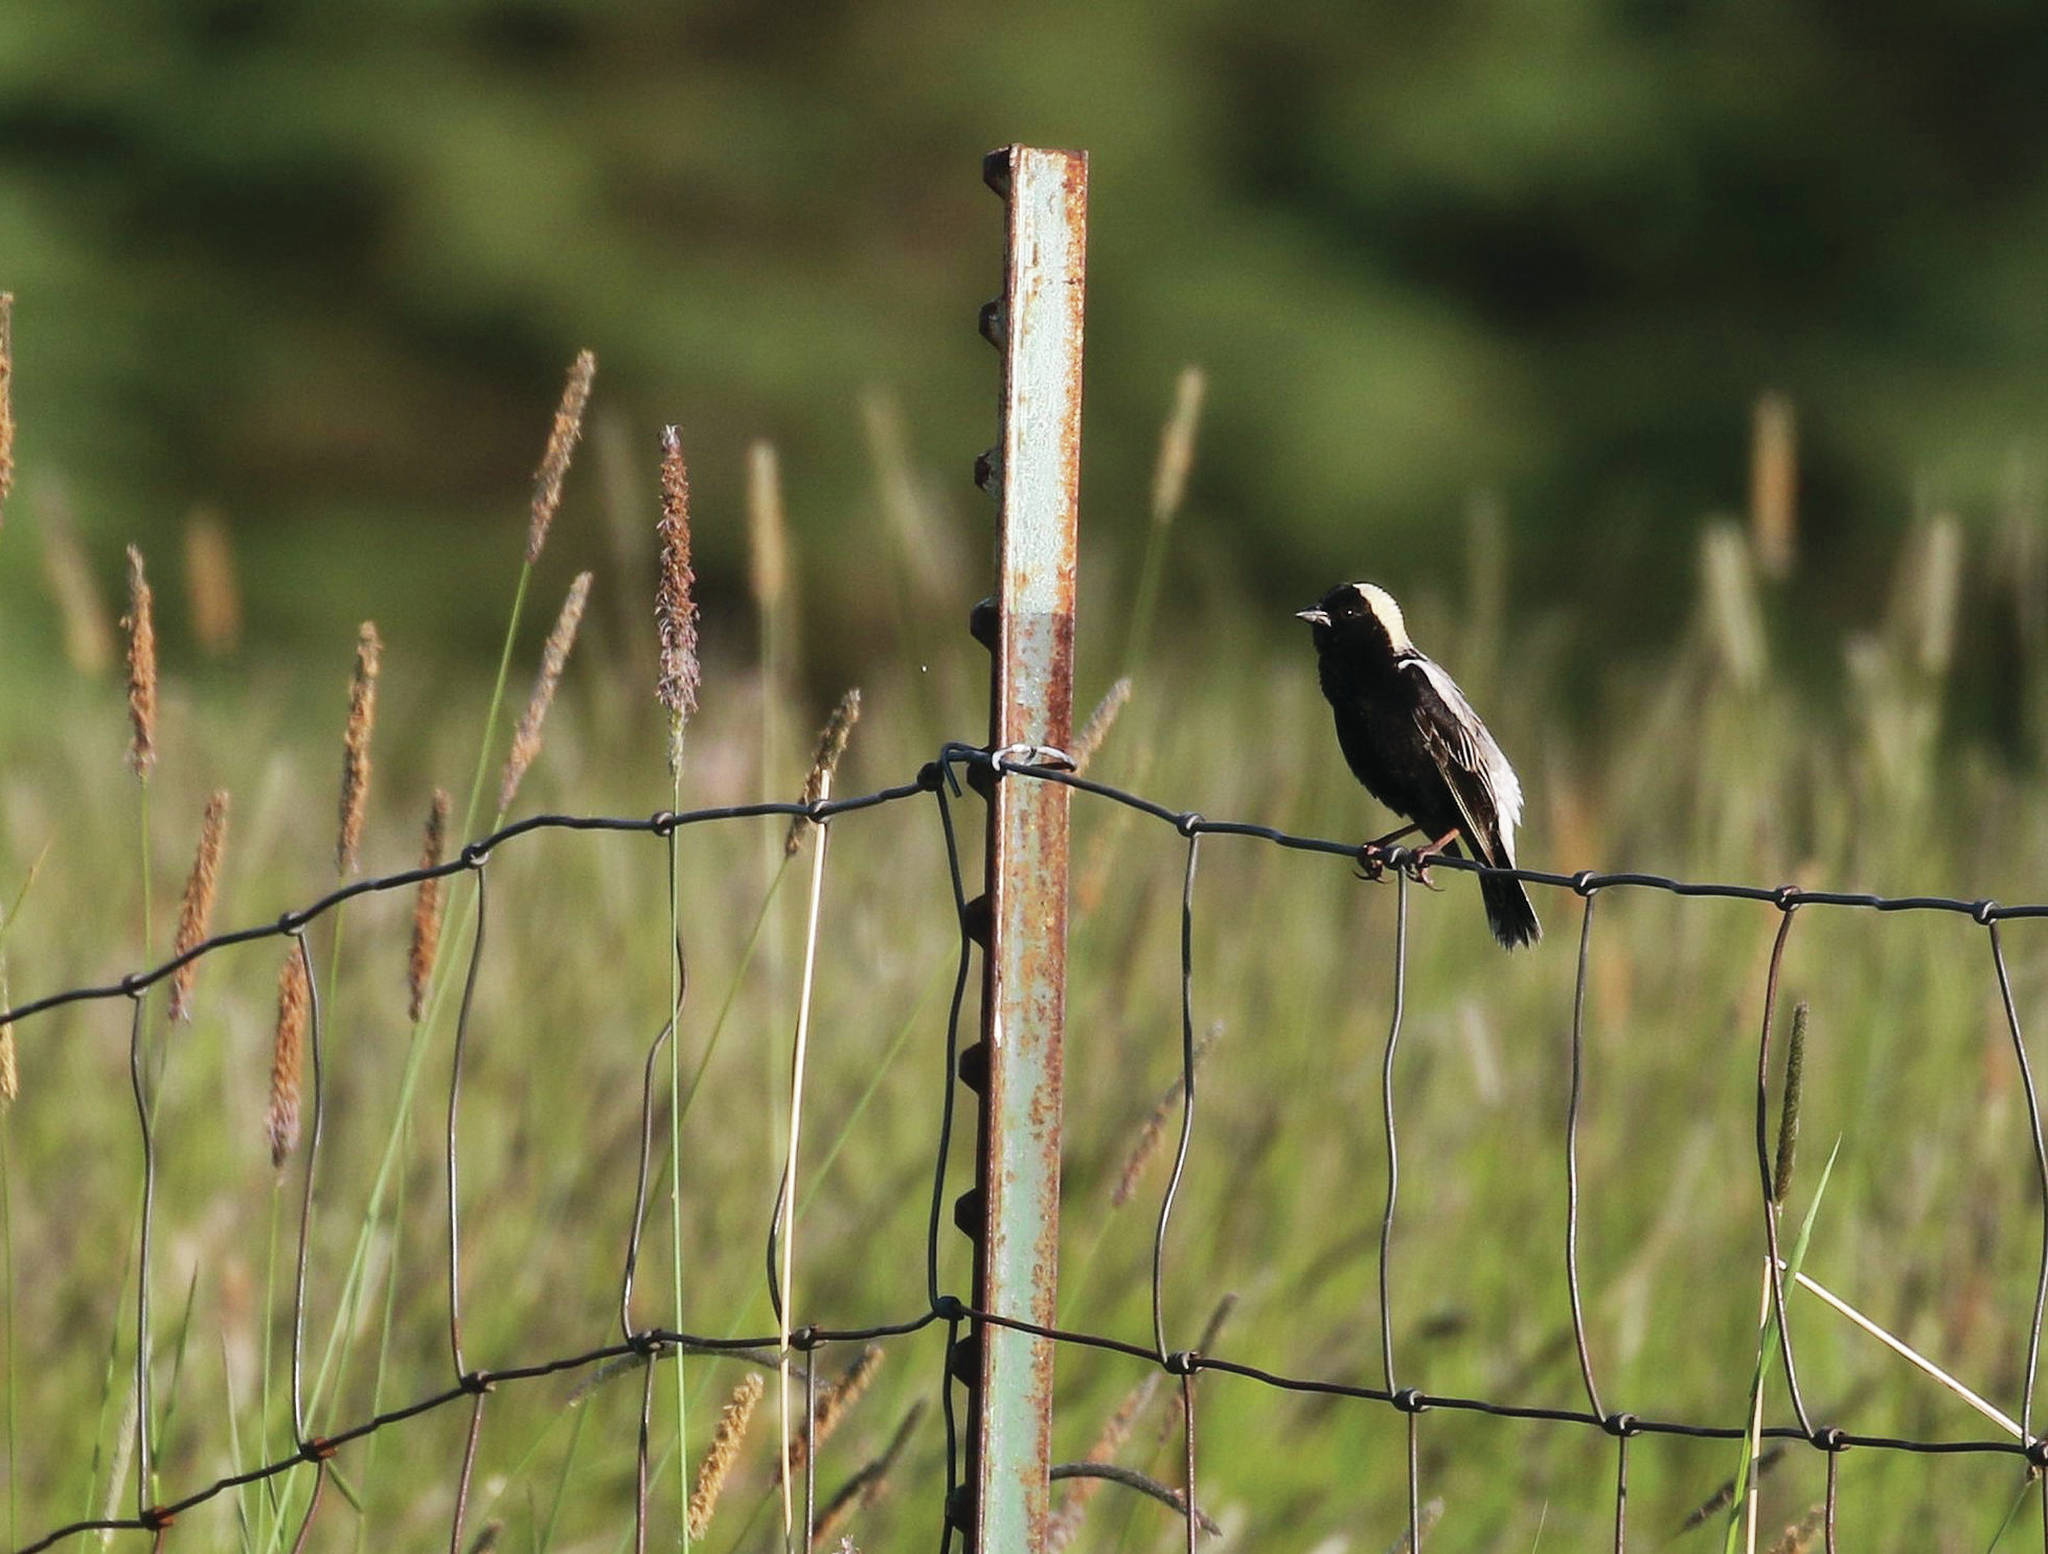 This adult male Bobolink was singing and displaying in a distant field near Homer, Alaska. With the aid of a 500mm lens, astute birders documented the first occurrence of this species on the Kenai Peninsula. (Photo by Sarah Dzielski)